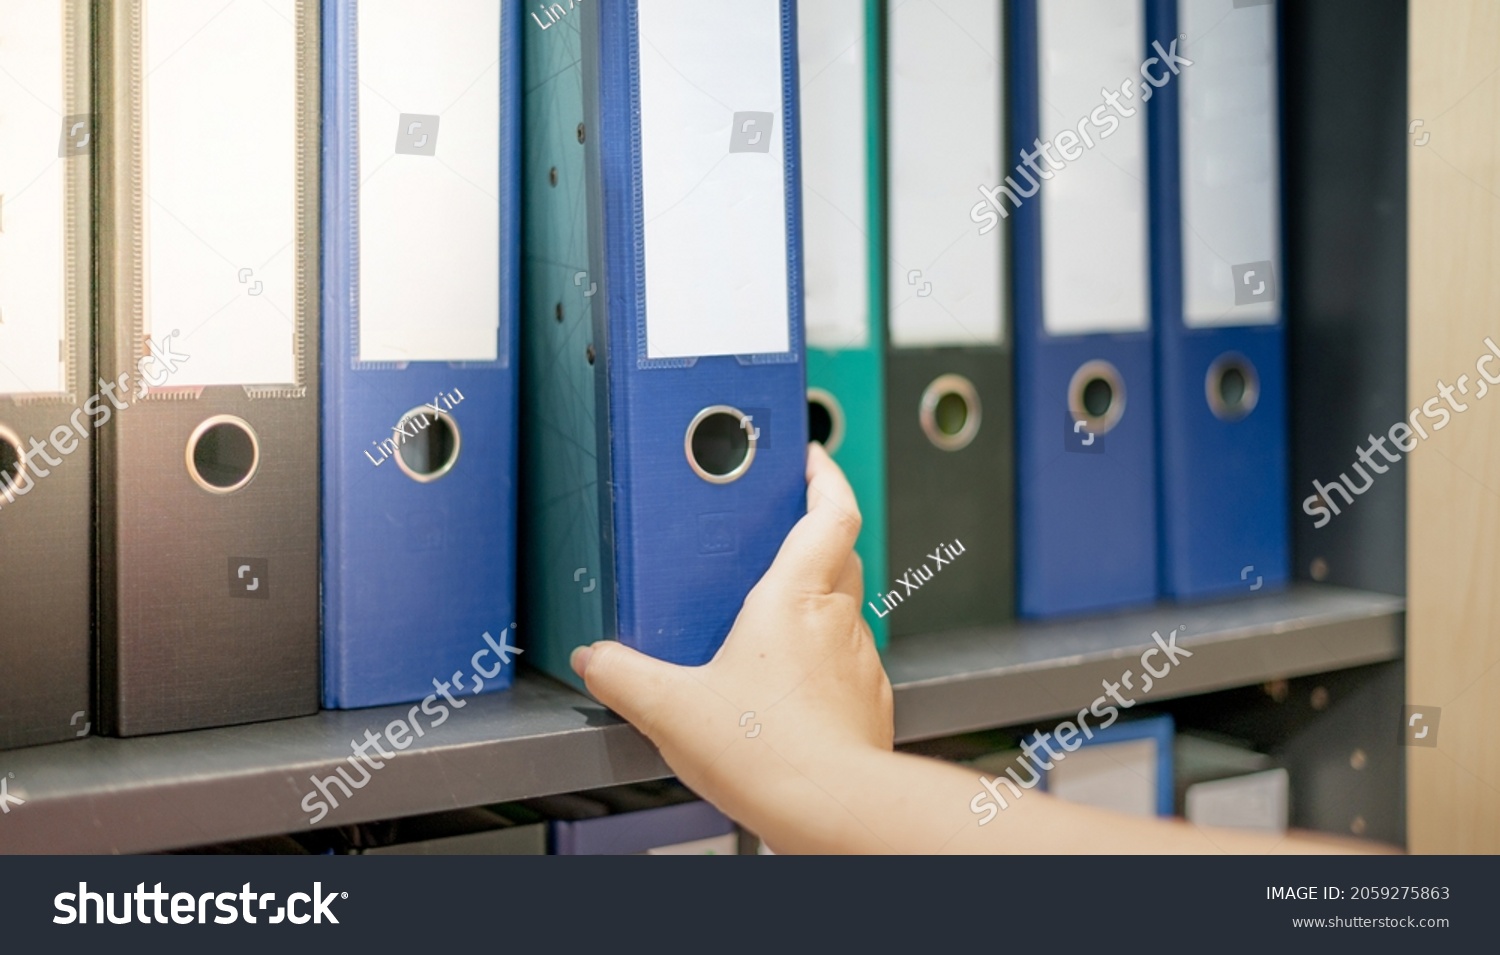 Female hand holding a binder of documents on the row of file folders that nicely management system on the office's shelves. #2059275863